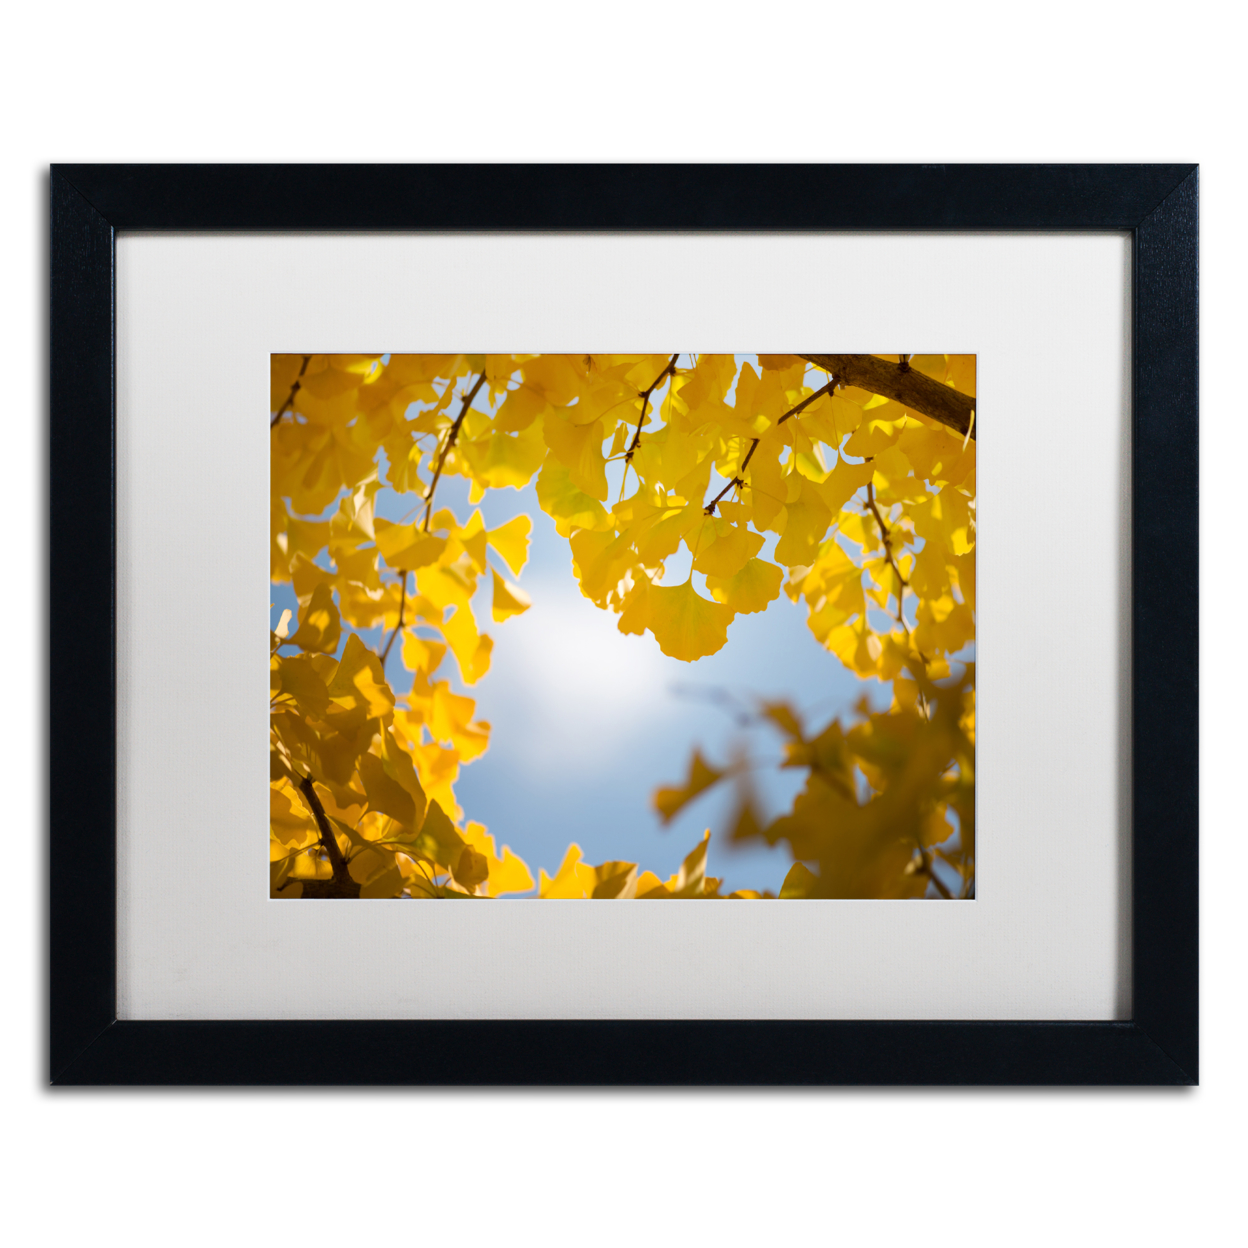 Philippe Sainte-Laudy 'Ginkgo Leaves In Autumn' Black Wooden Framed Art 18 X 22 Inches